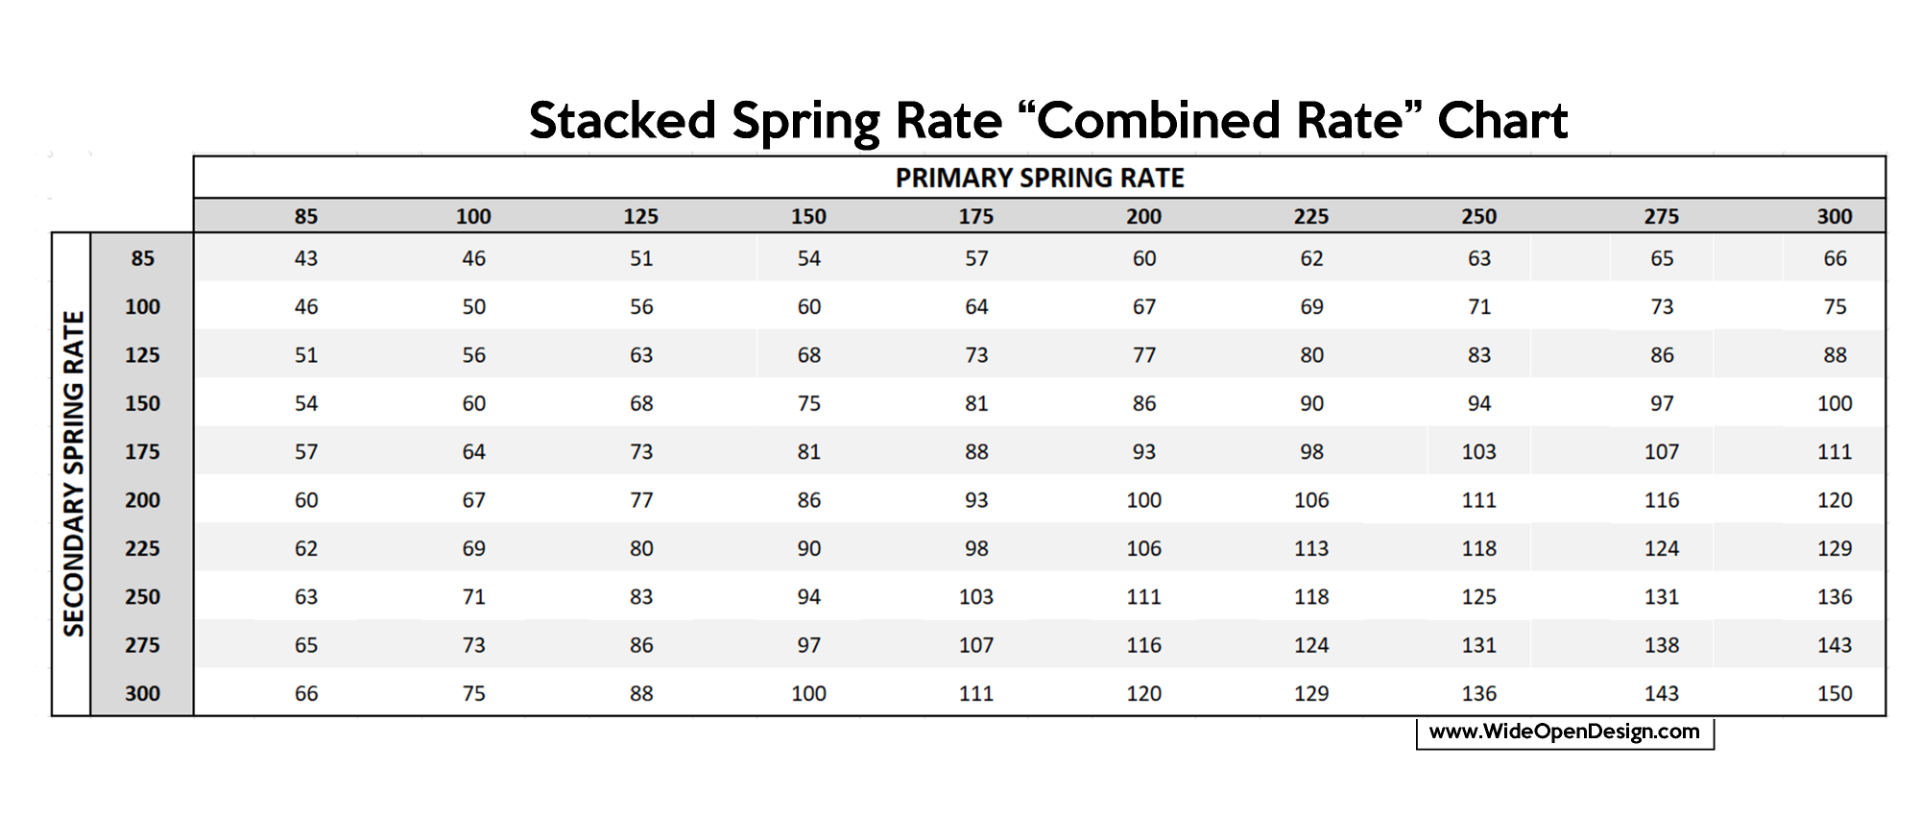 Stacked Spring Rate "Combined Rate" Chart for 16 Inch Shocks